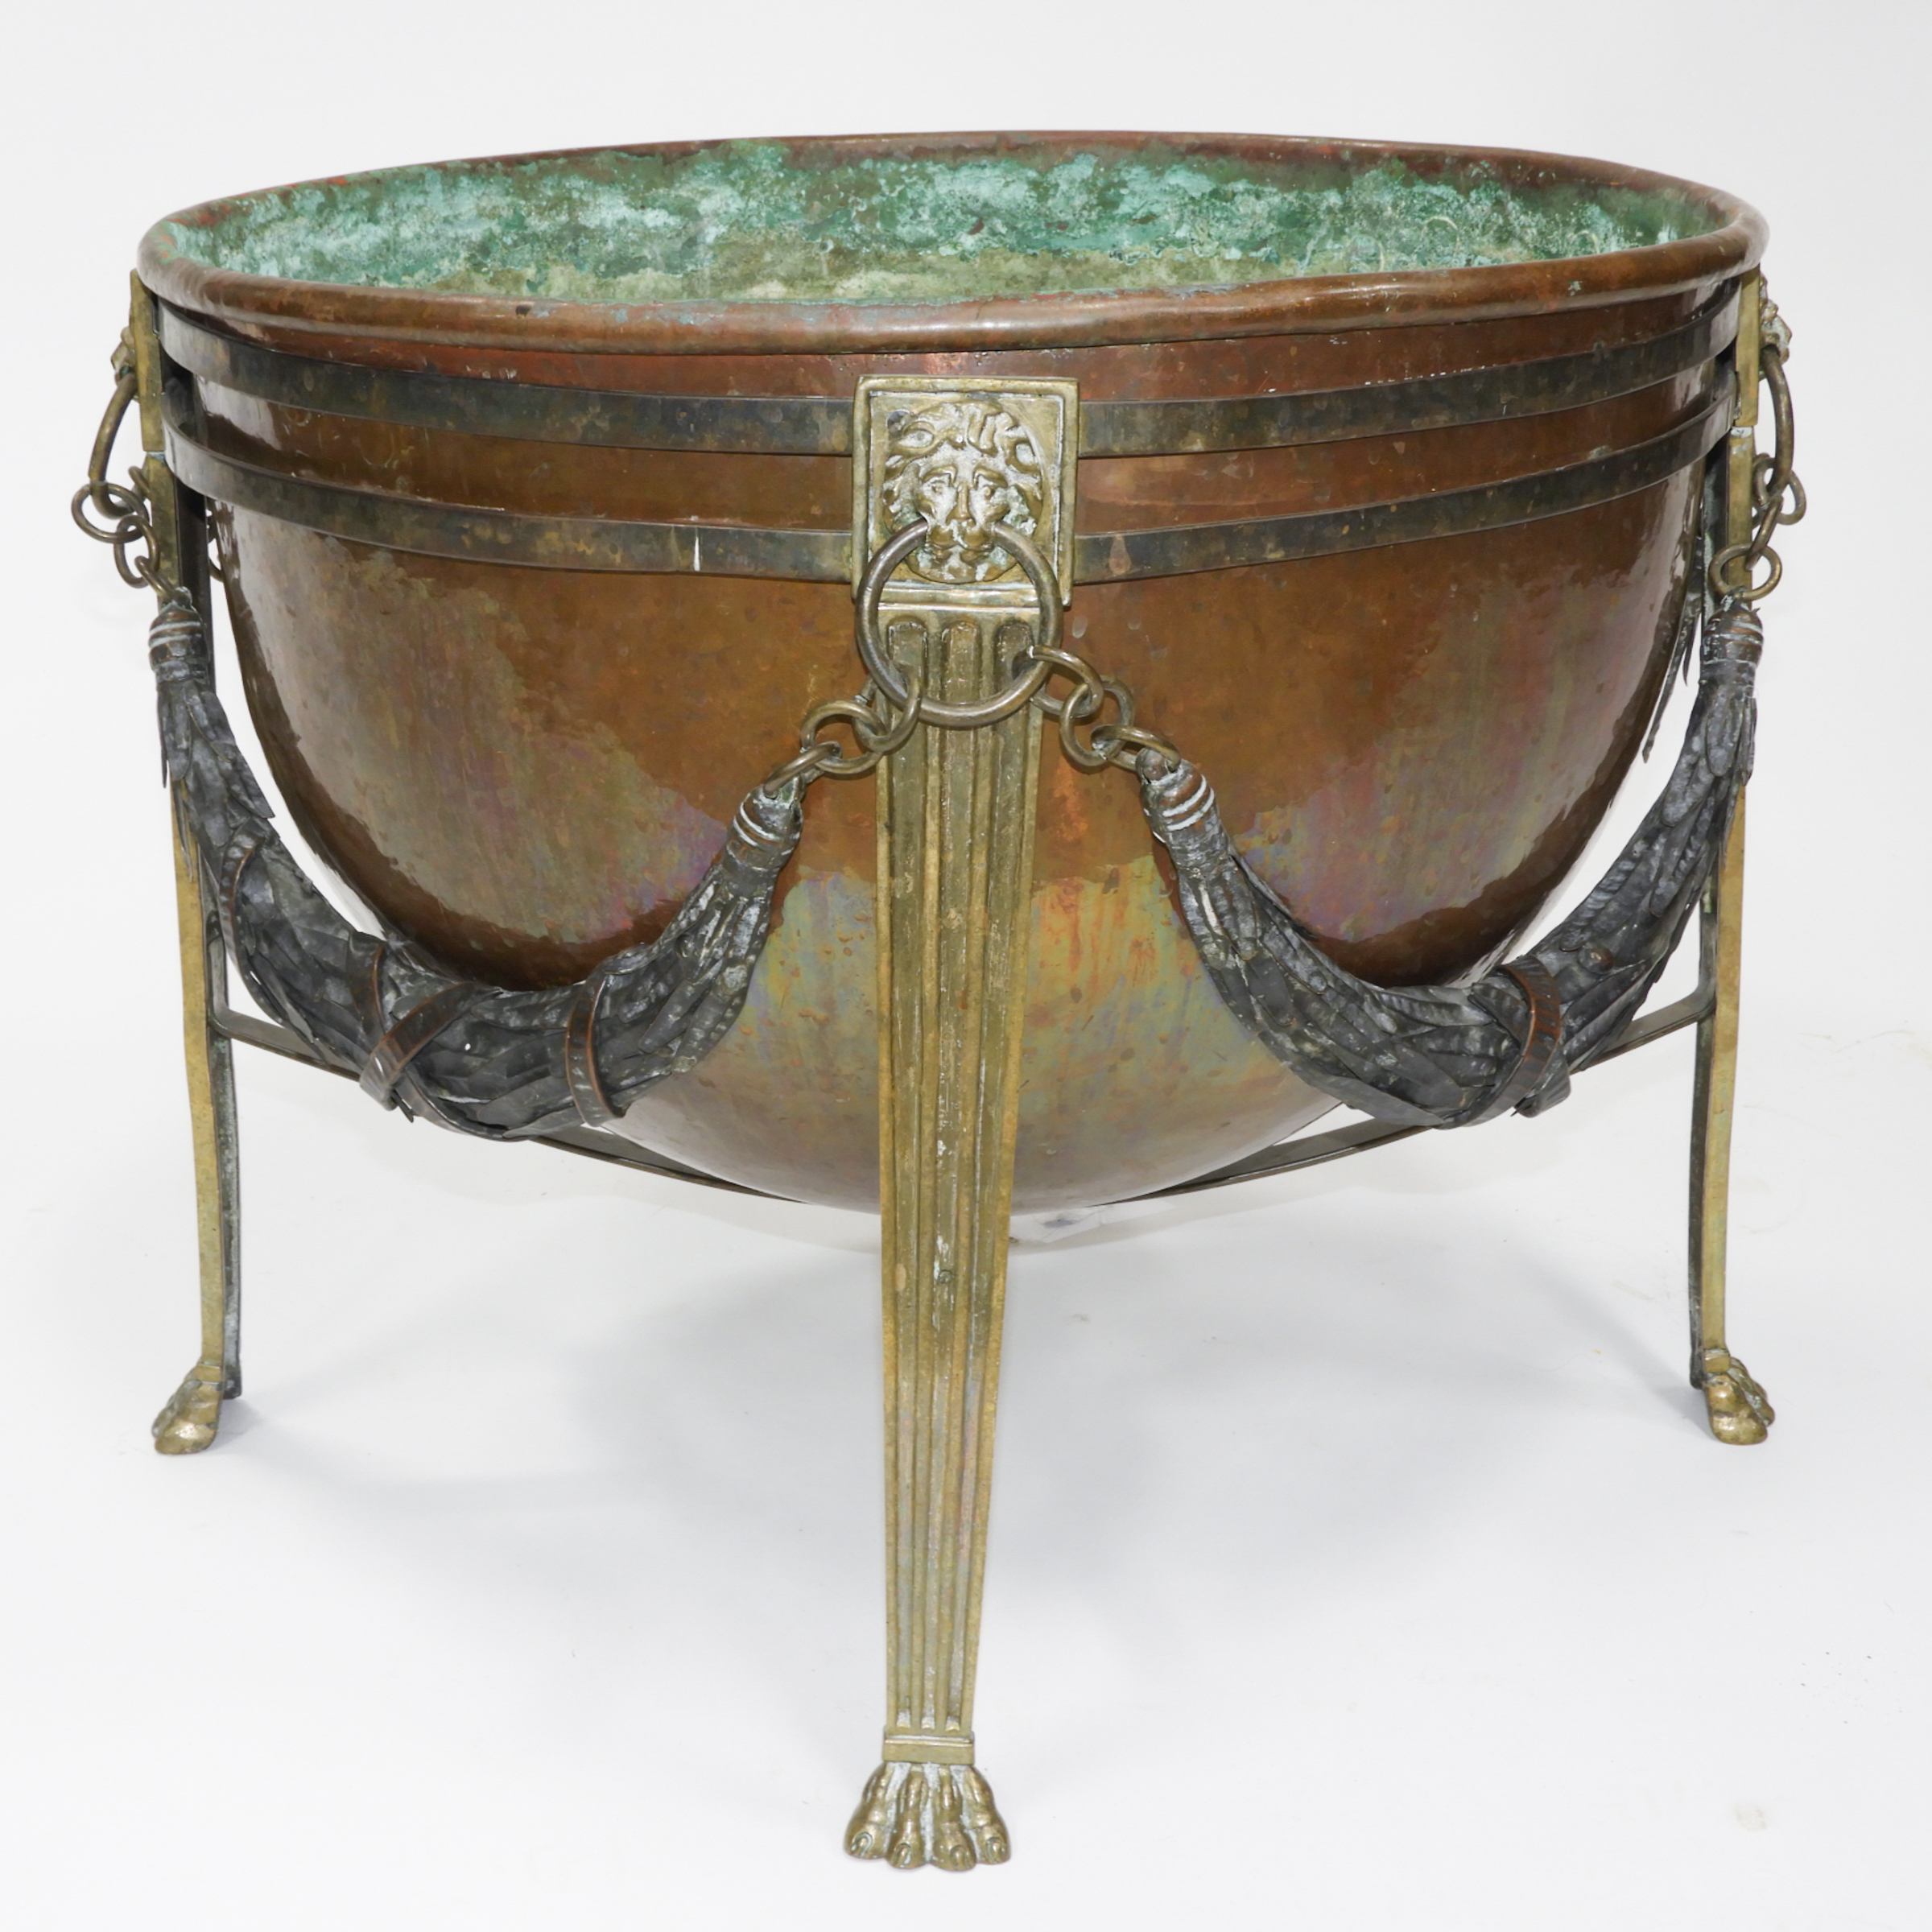 Neoclassical Cauldron Form Jardiniere on Stand, 19th century